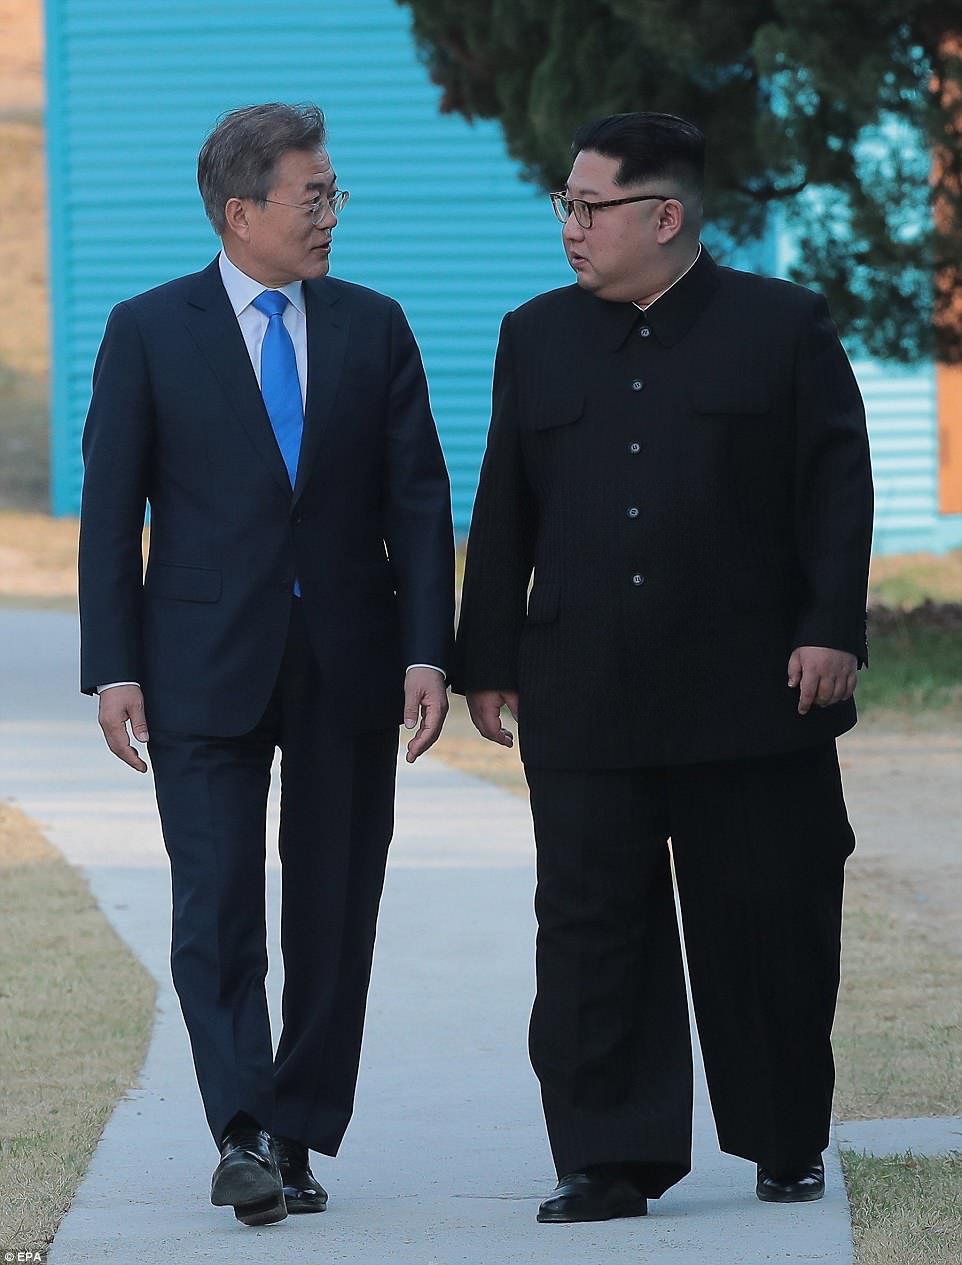 Kim said 'we are going to be one again' as he spoke of 'sharing the same blood' before adding: 'We should pave the way for a new future where all the people can live peacefully'